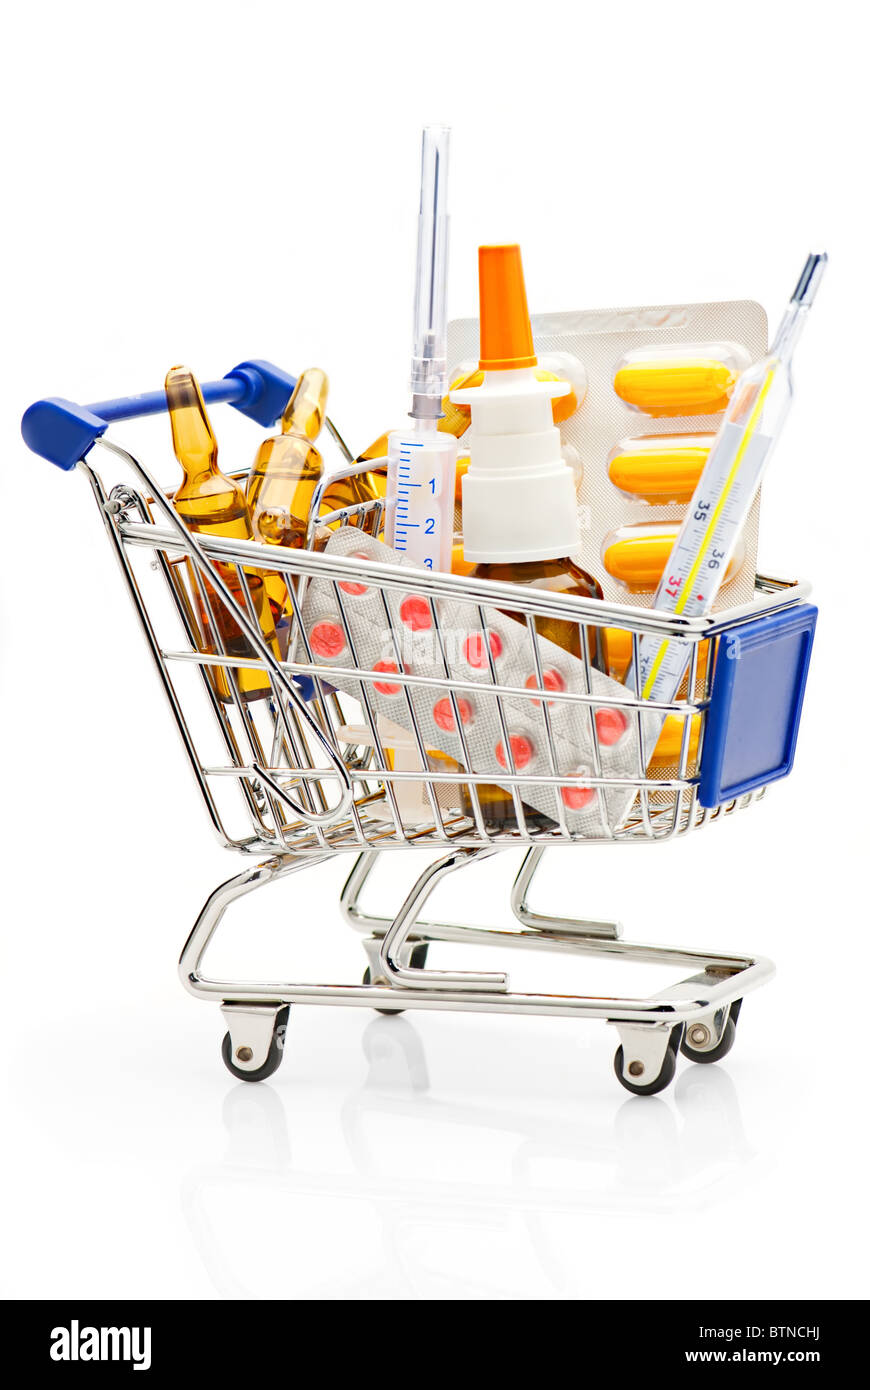 Pharmacy. Shopping Cart full with different medical supplies Stock Photo